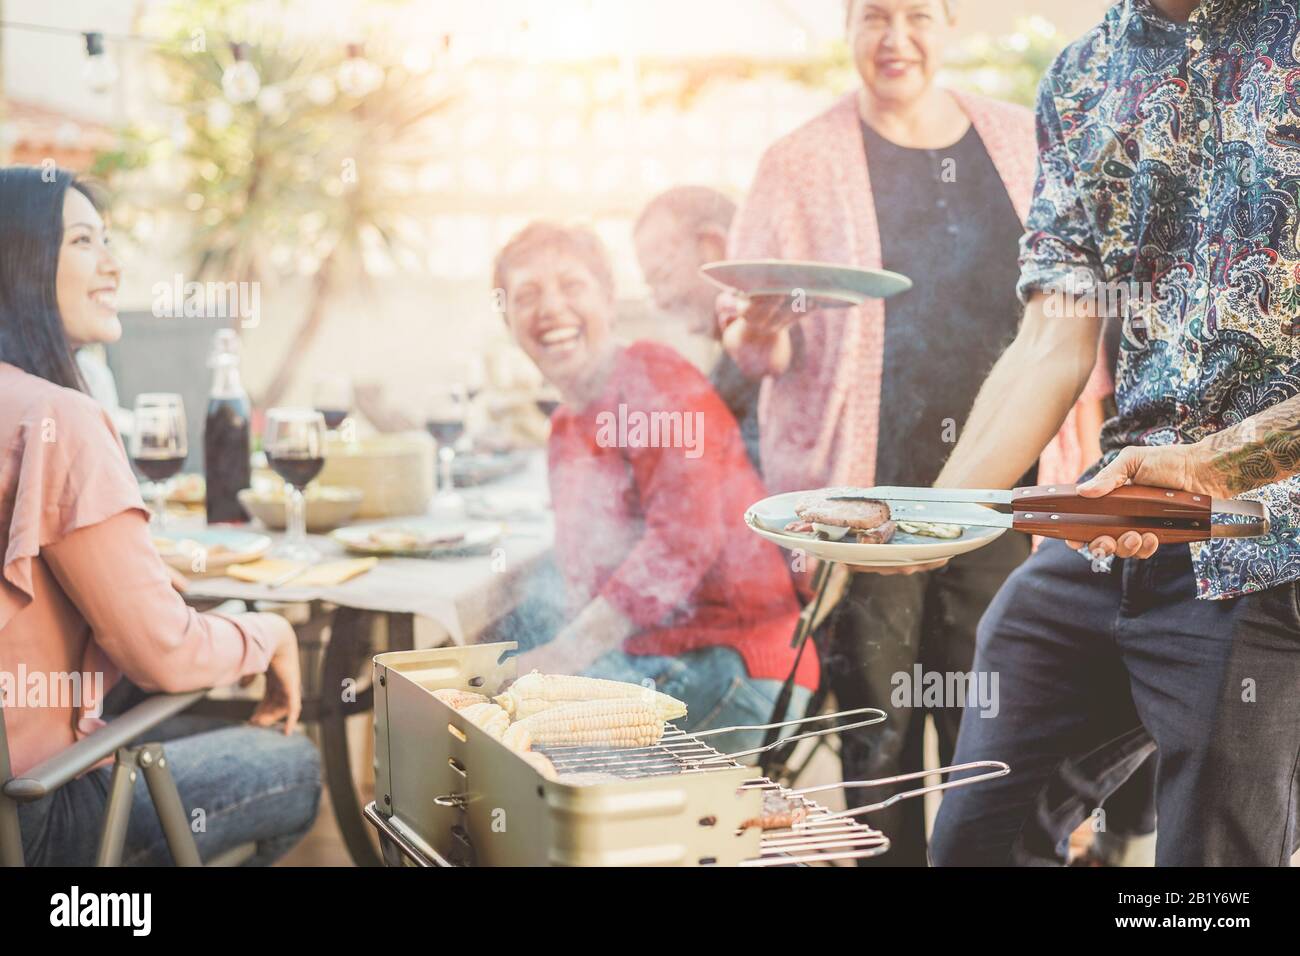 Trendy man cooking and serving meat at barbecue dinner outdoor - Chef grilling food for family friends at bbq meal outside - Summer lifestyle, friends Stock Photo